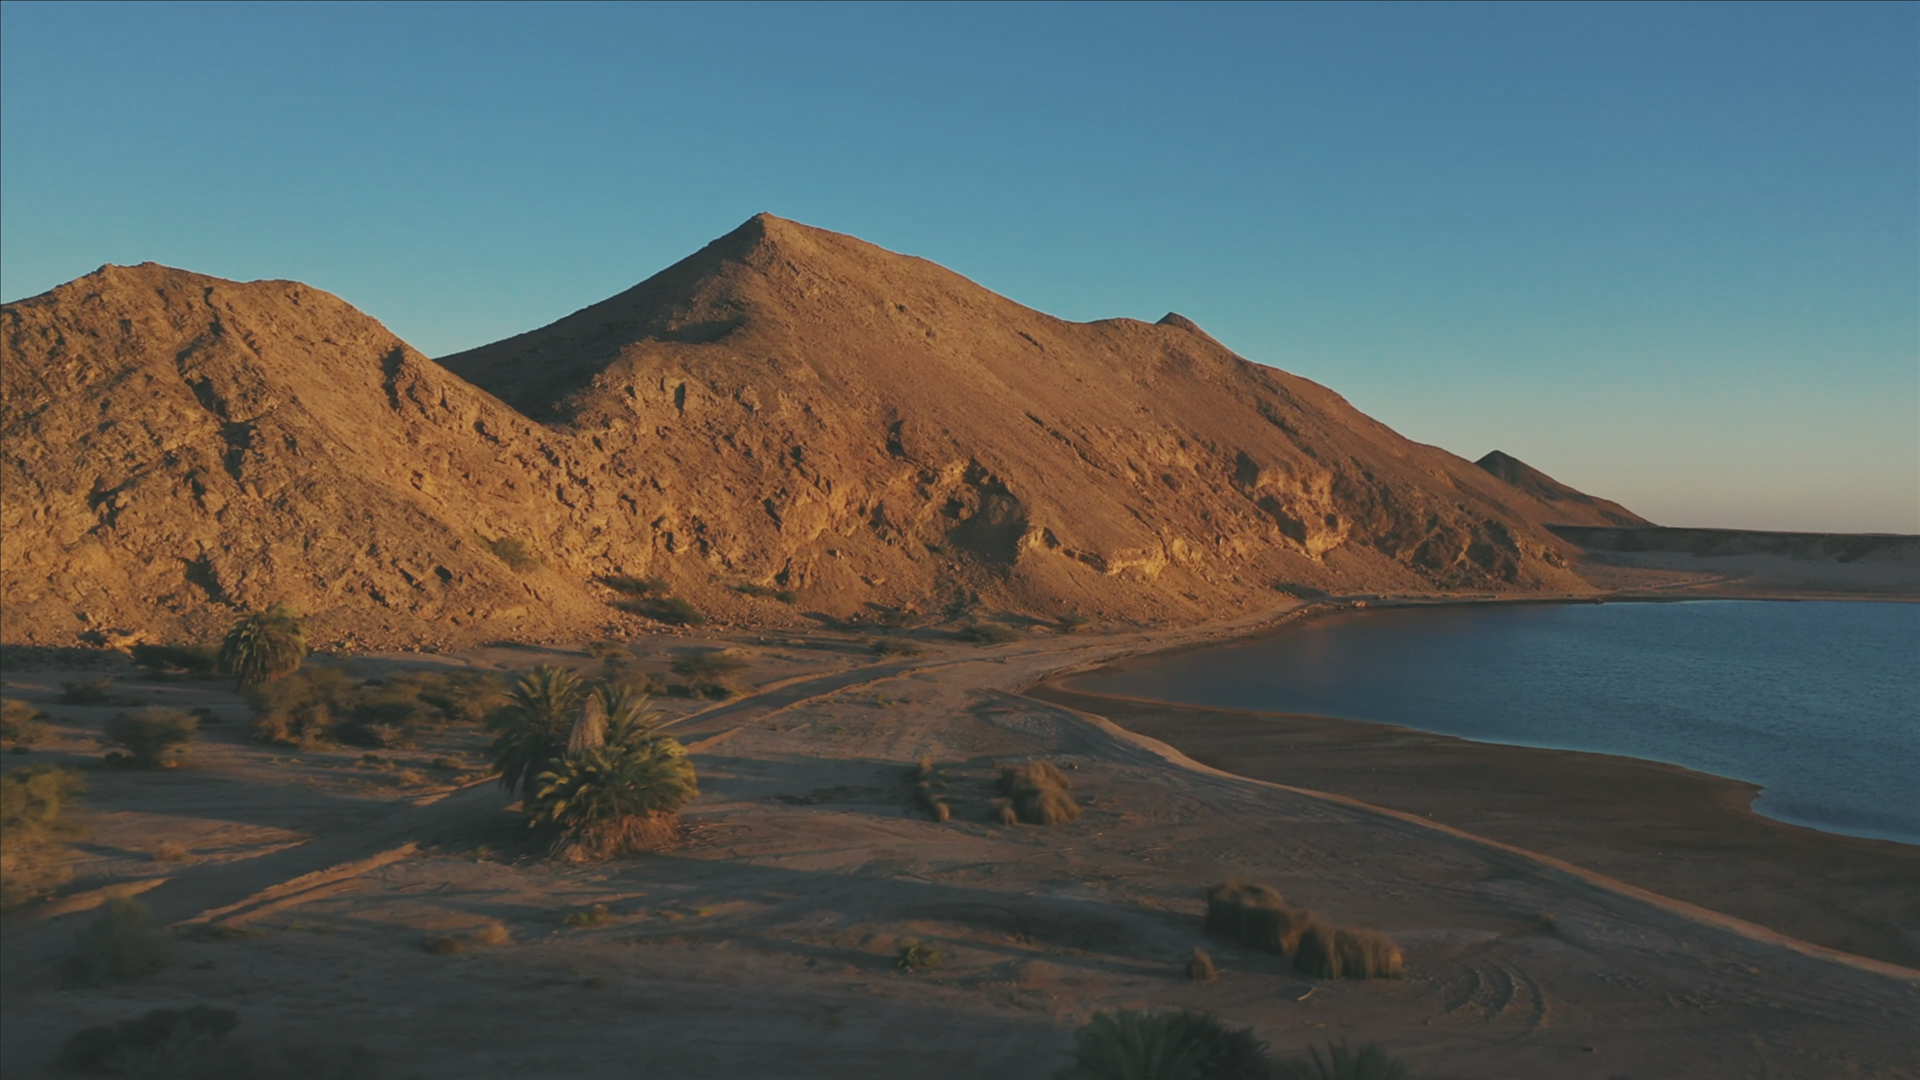 The RED SEA and AMAALA are located on the ancient trading route of the silk road and are as dedicated to the preservation of the area’s history as they are to the conservation of its natural landscapes